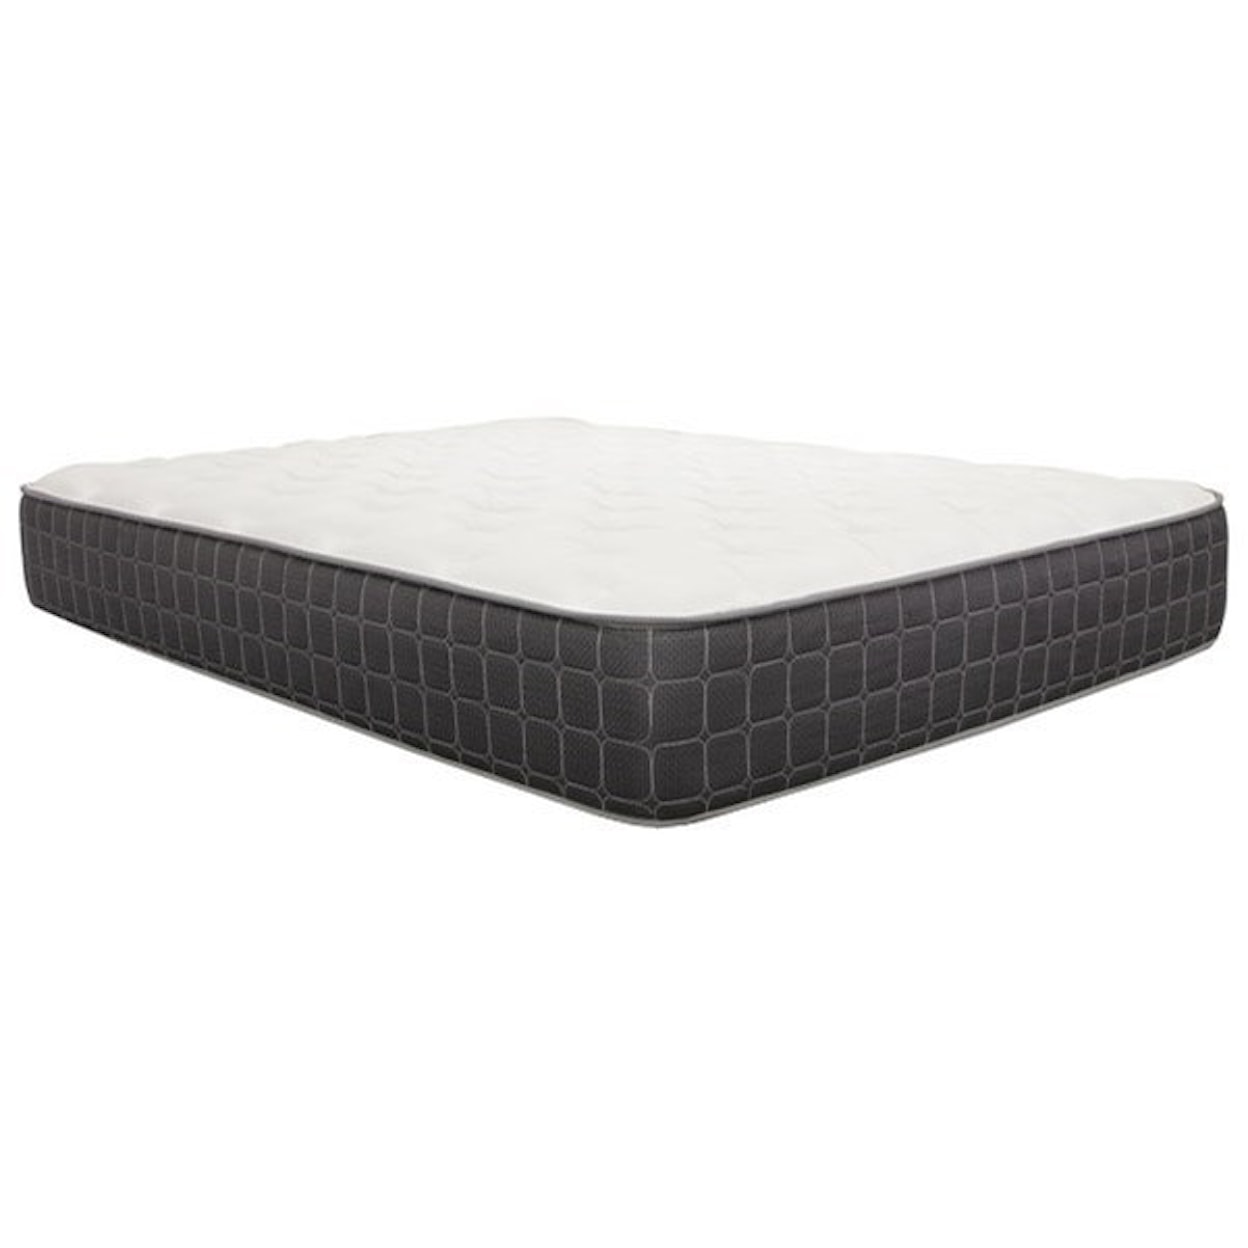 Corsicana Dilly Plush King Plush Pocketed Coil Mattress